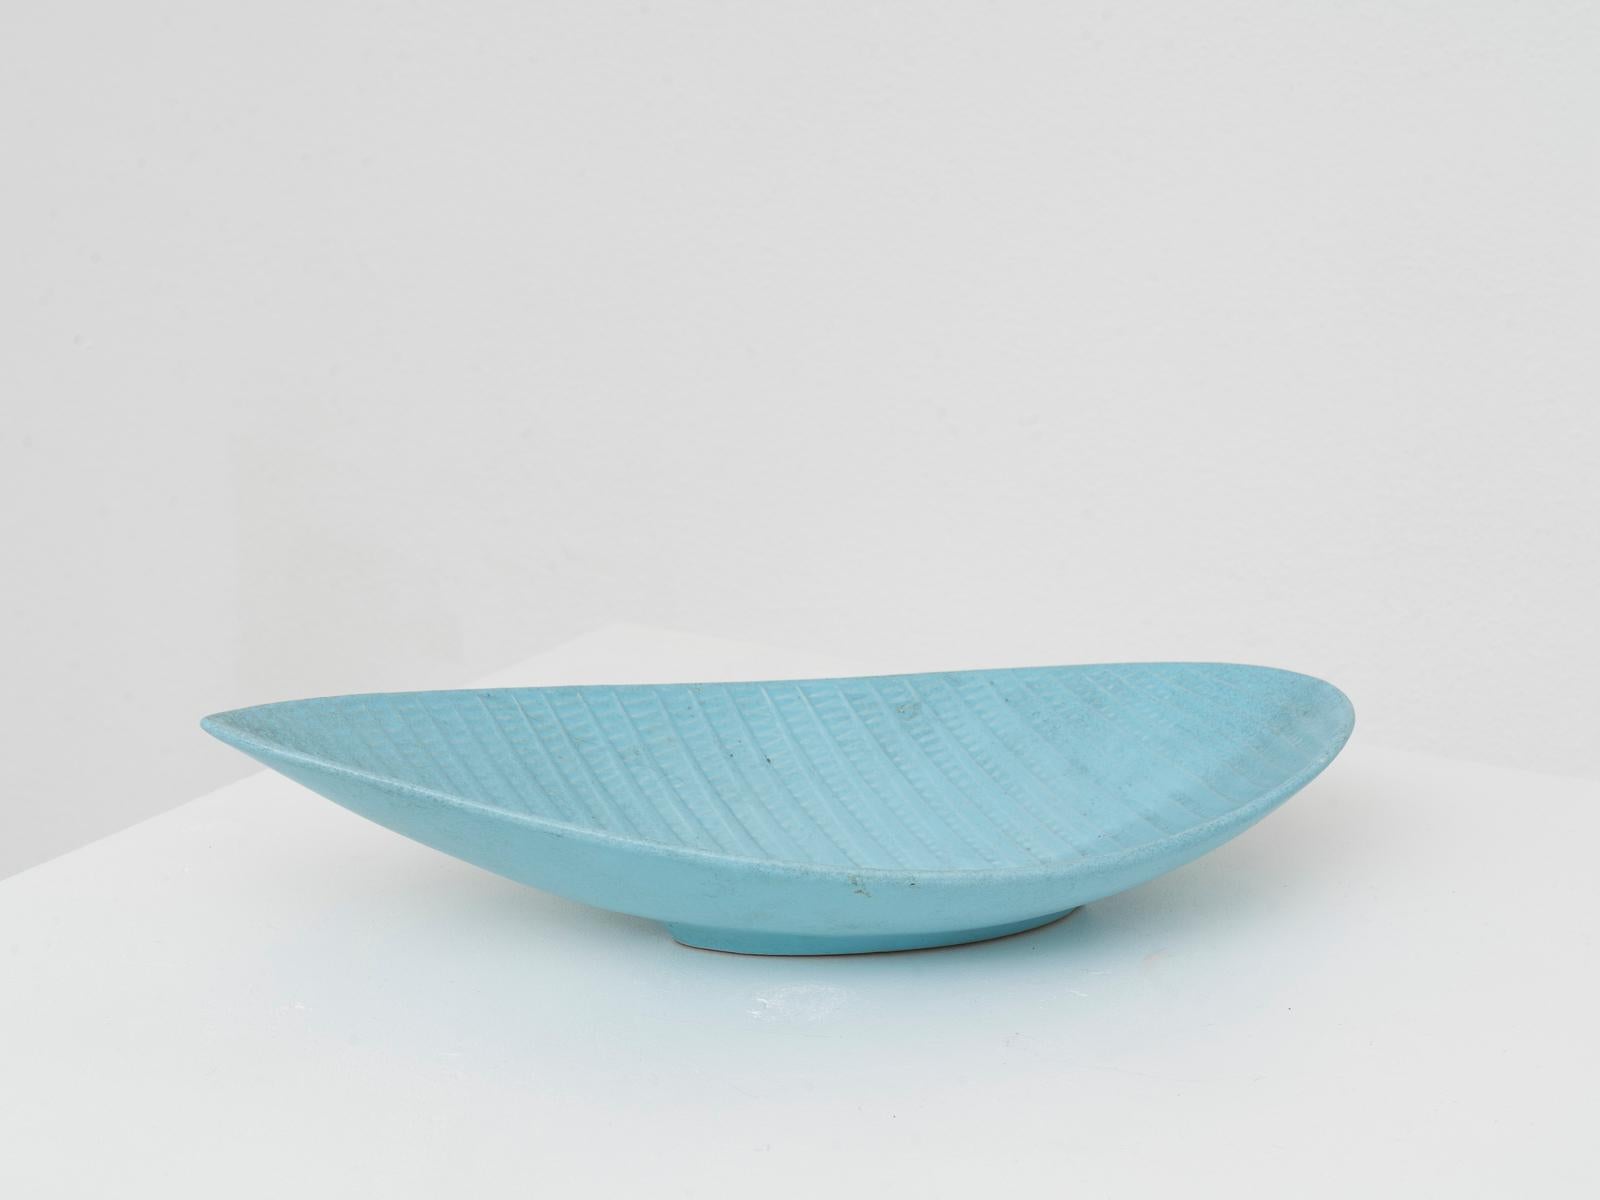 This leaf-shaped ceramic centerpiece is part of the iconic 